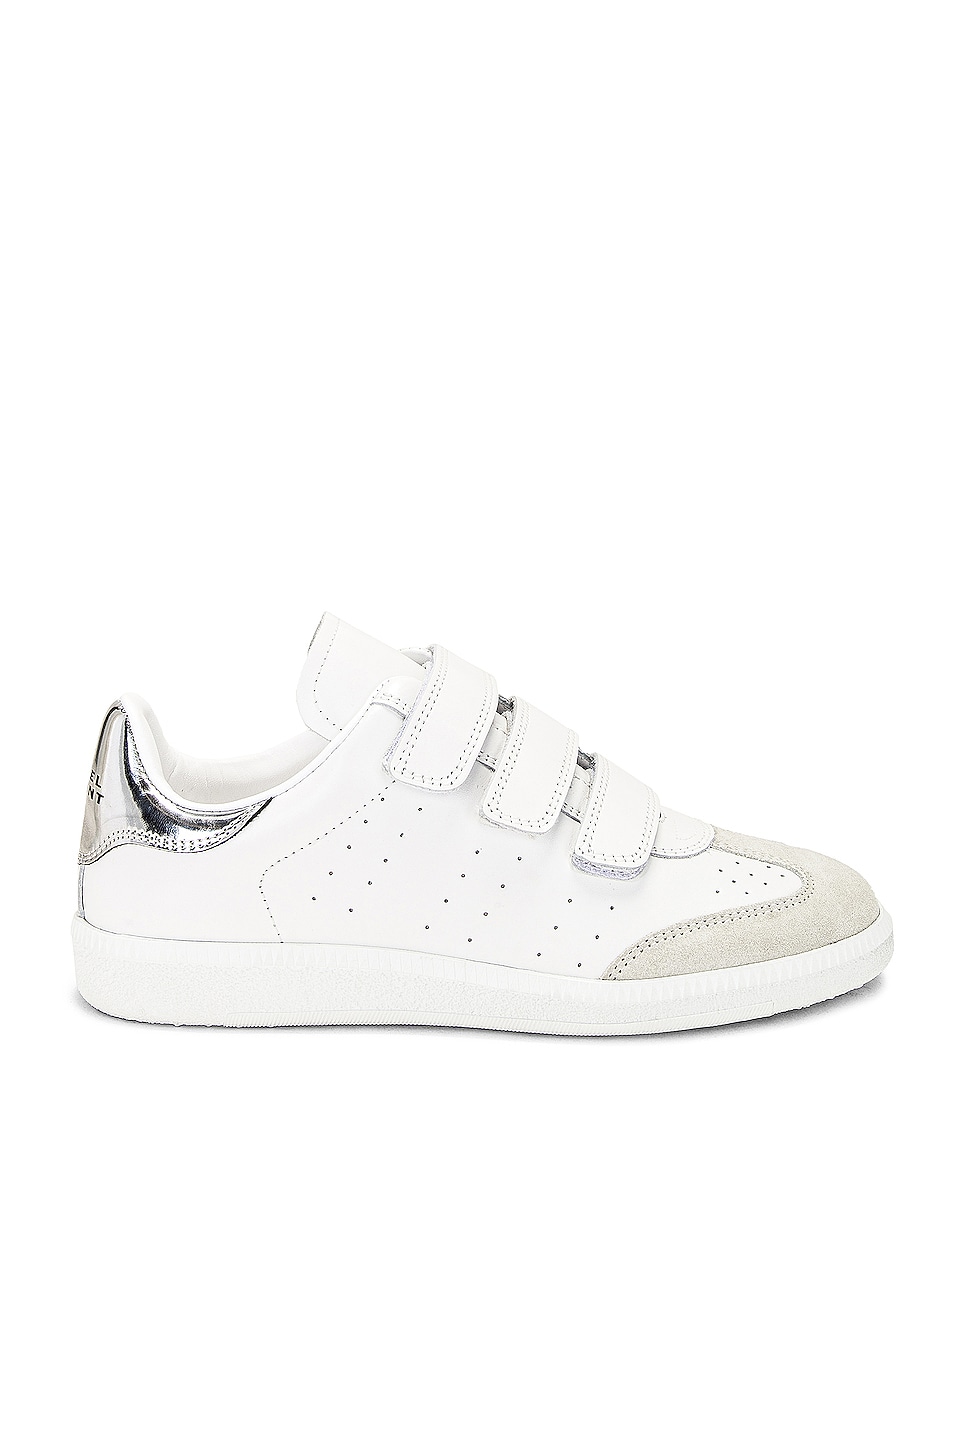 Image 1 of Isabel Marant Beth Sneaker in Silver